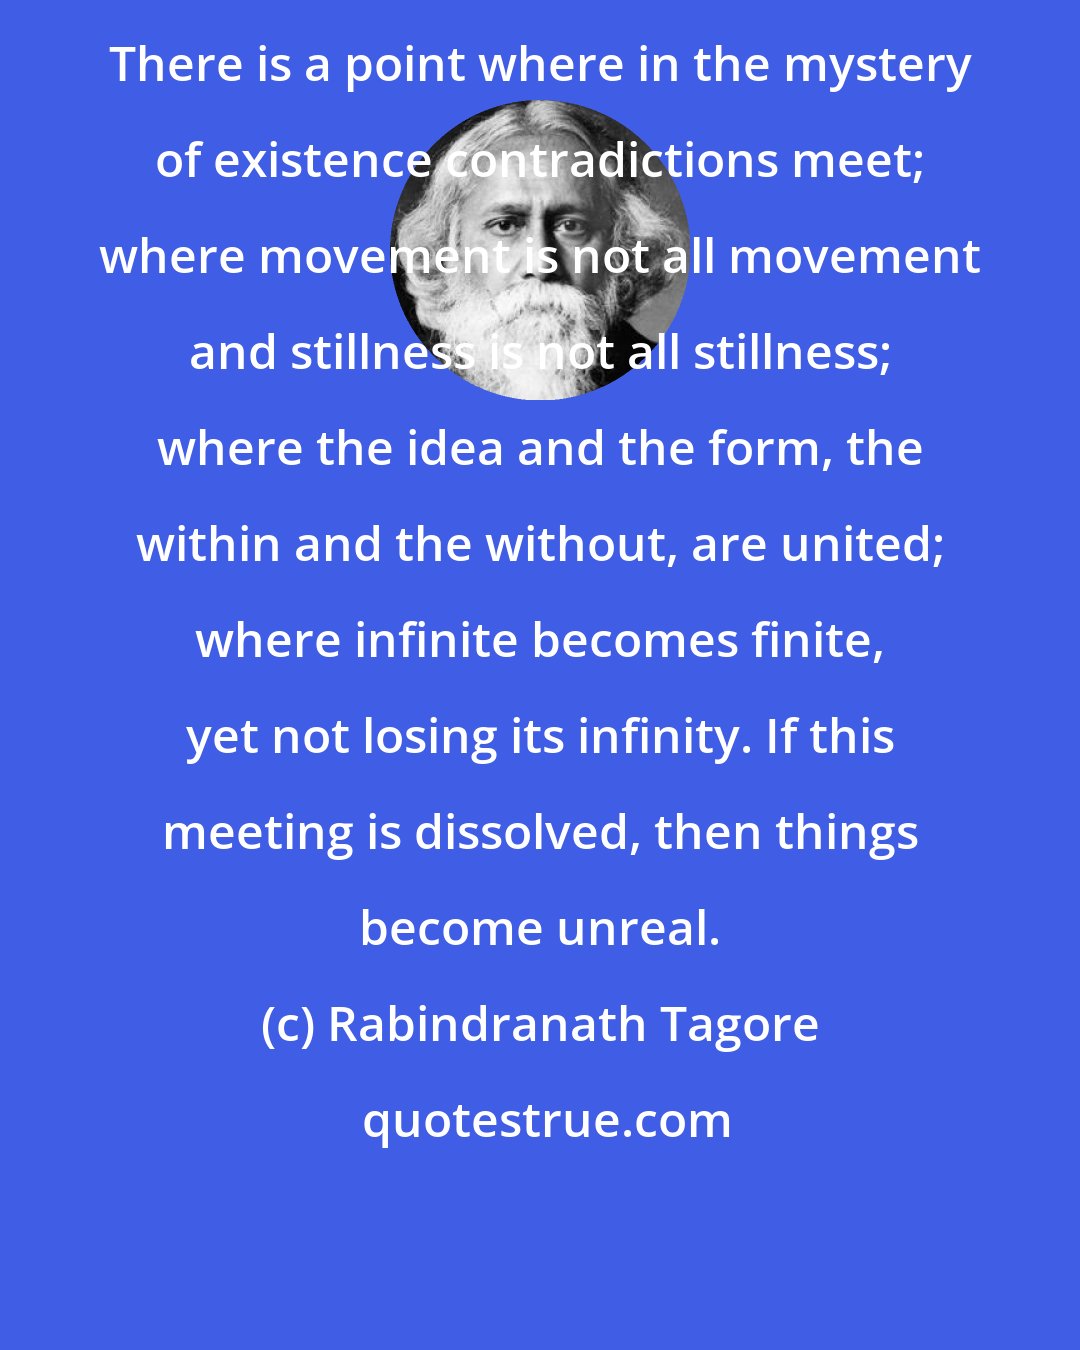 Rabindranath Tagore: There is a point where in the mystery of existence contradictions meet; where movement is not all movement and stillness is not all stillness; where the idea and the form, the within and the without, are united; where infinite becomes finite, yet not losing its infinity. If this meeting is dissolved, then things become unreal.